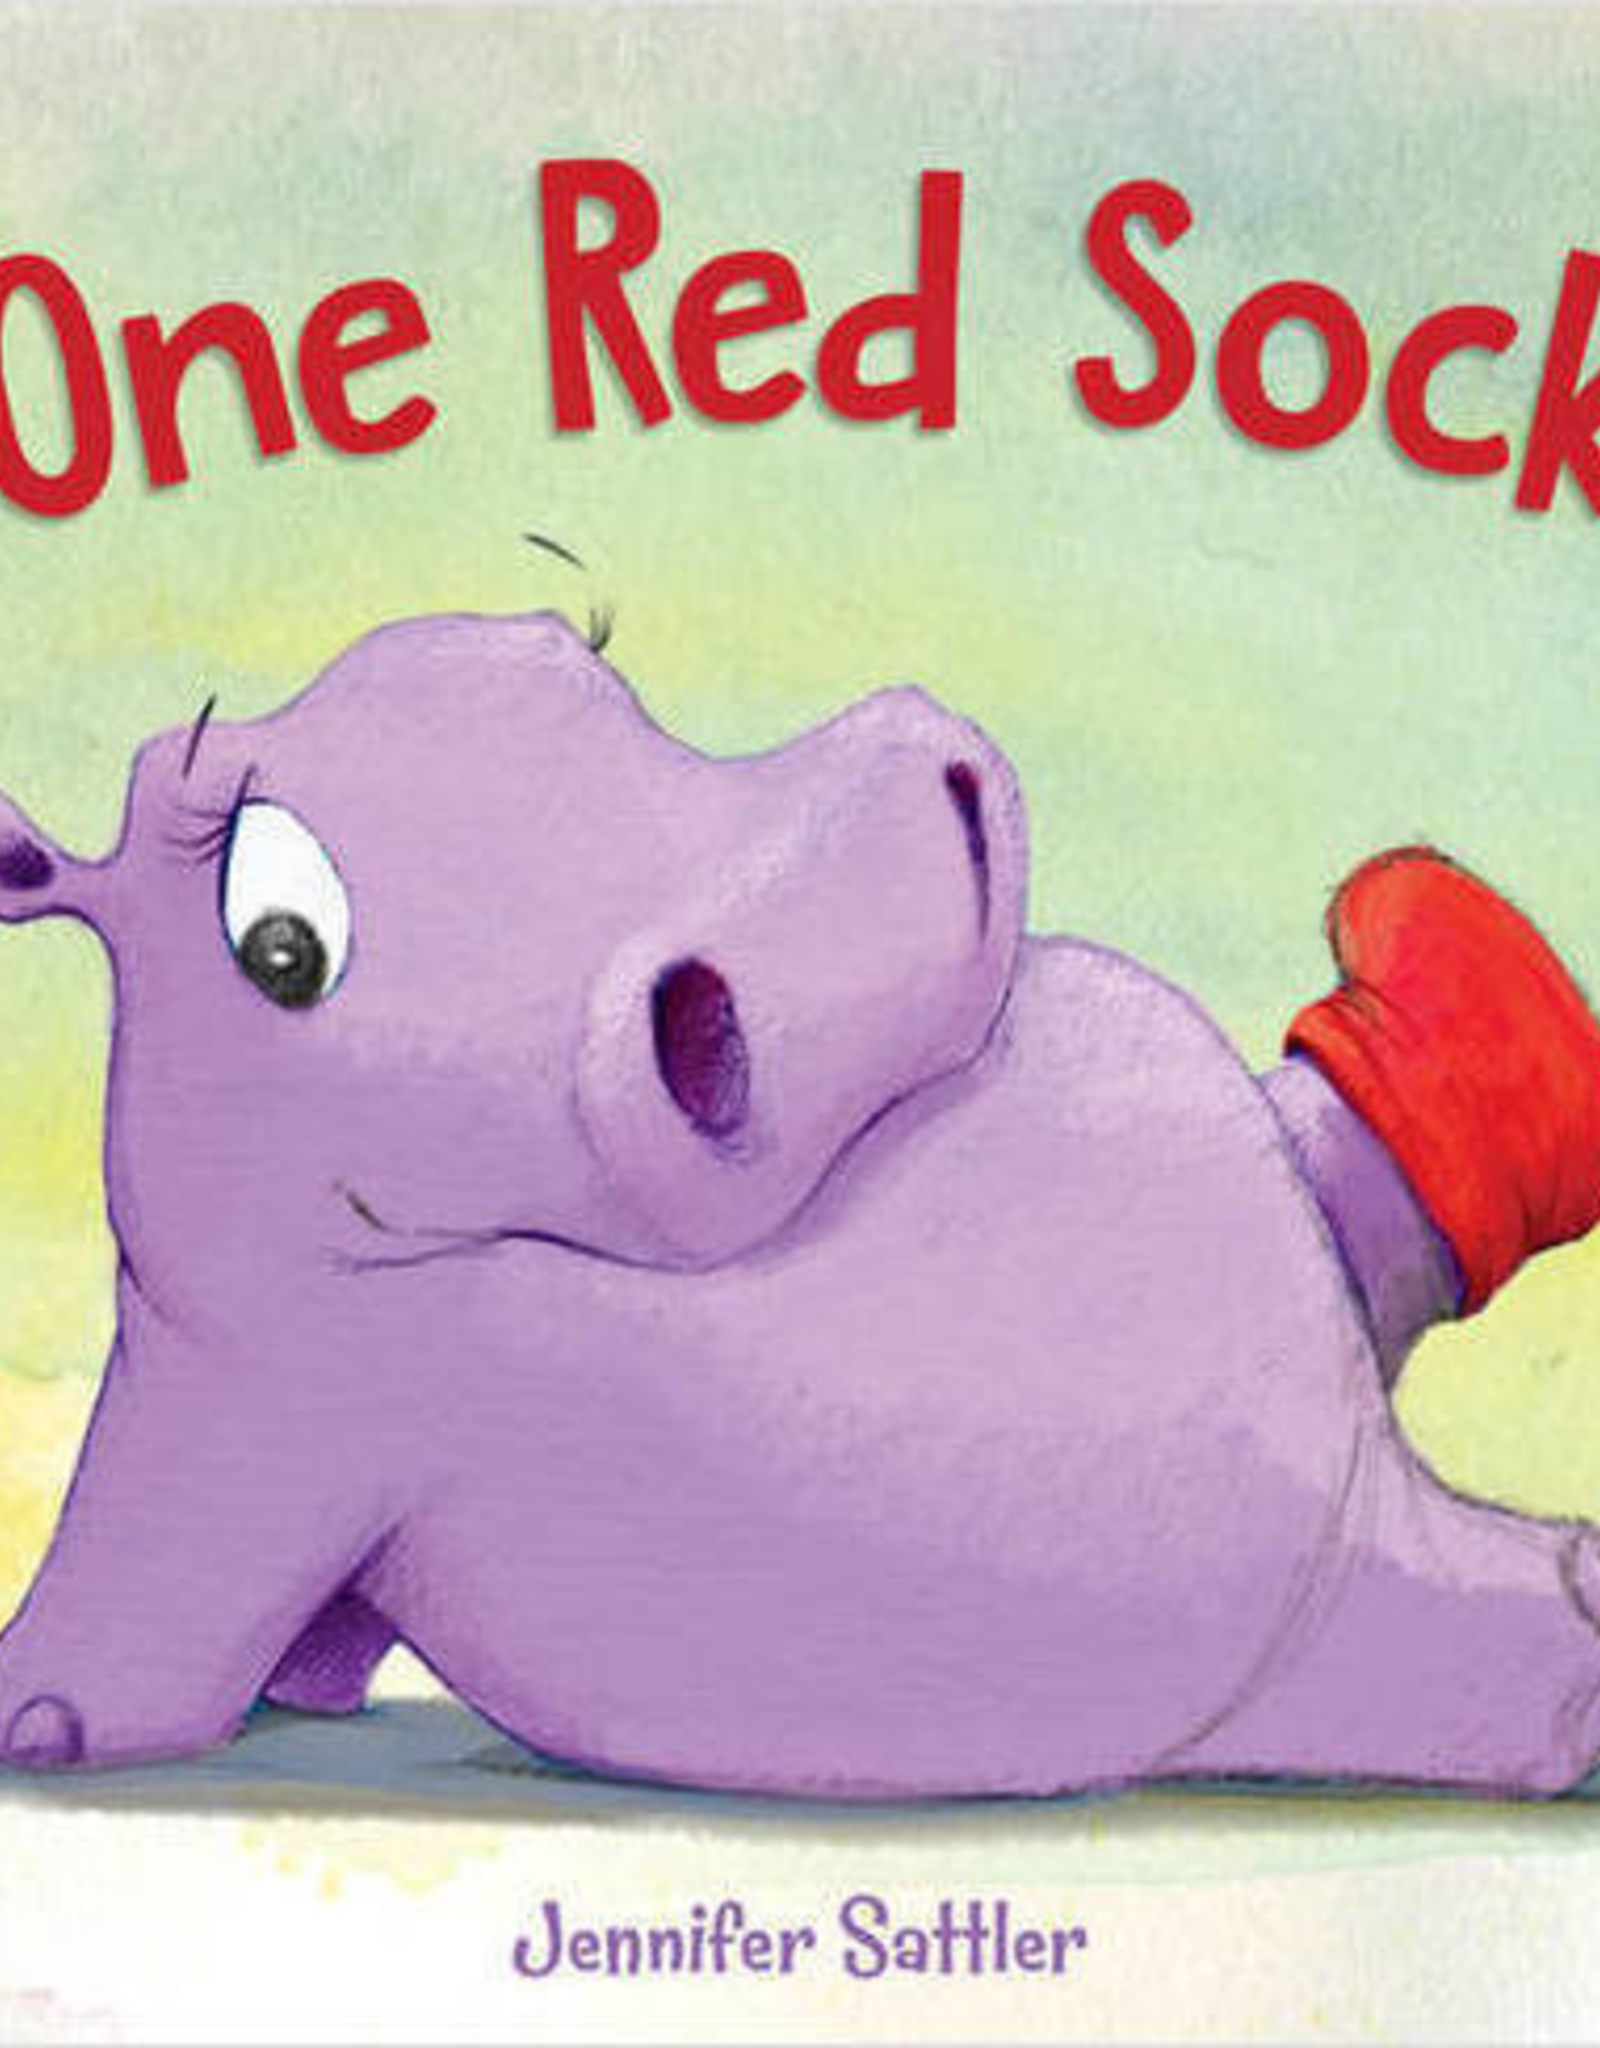 One Red Sock Book